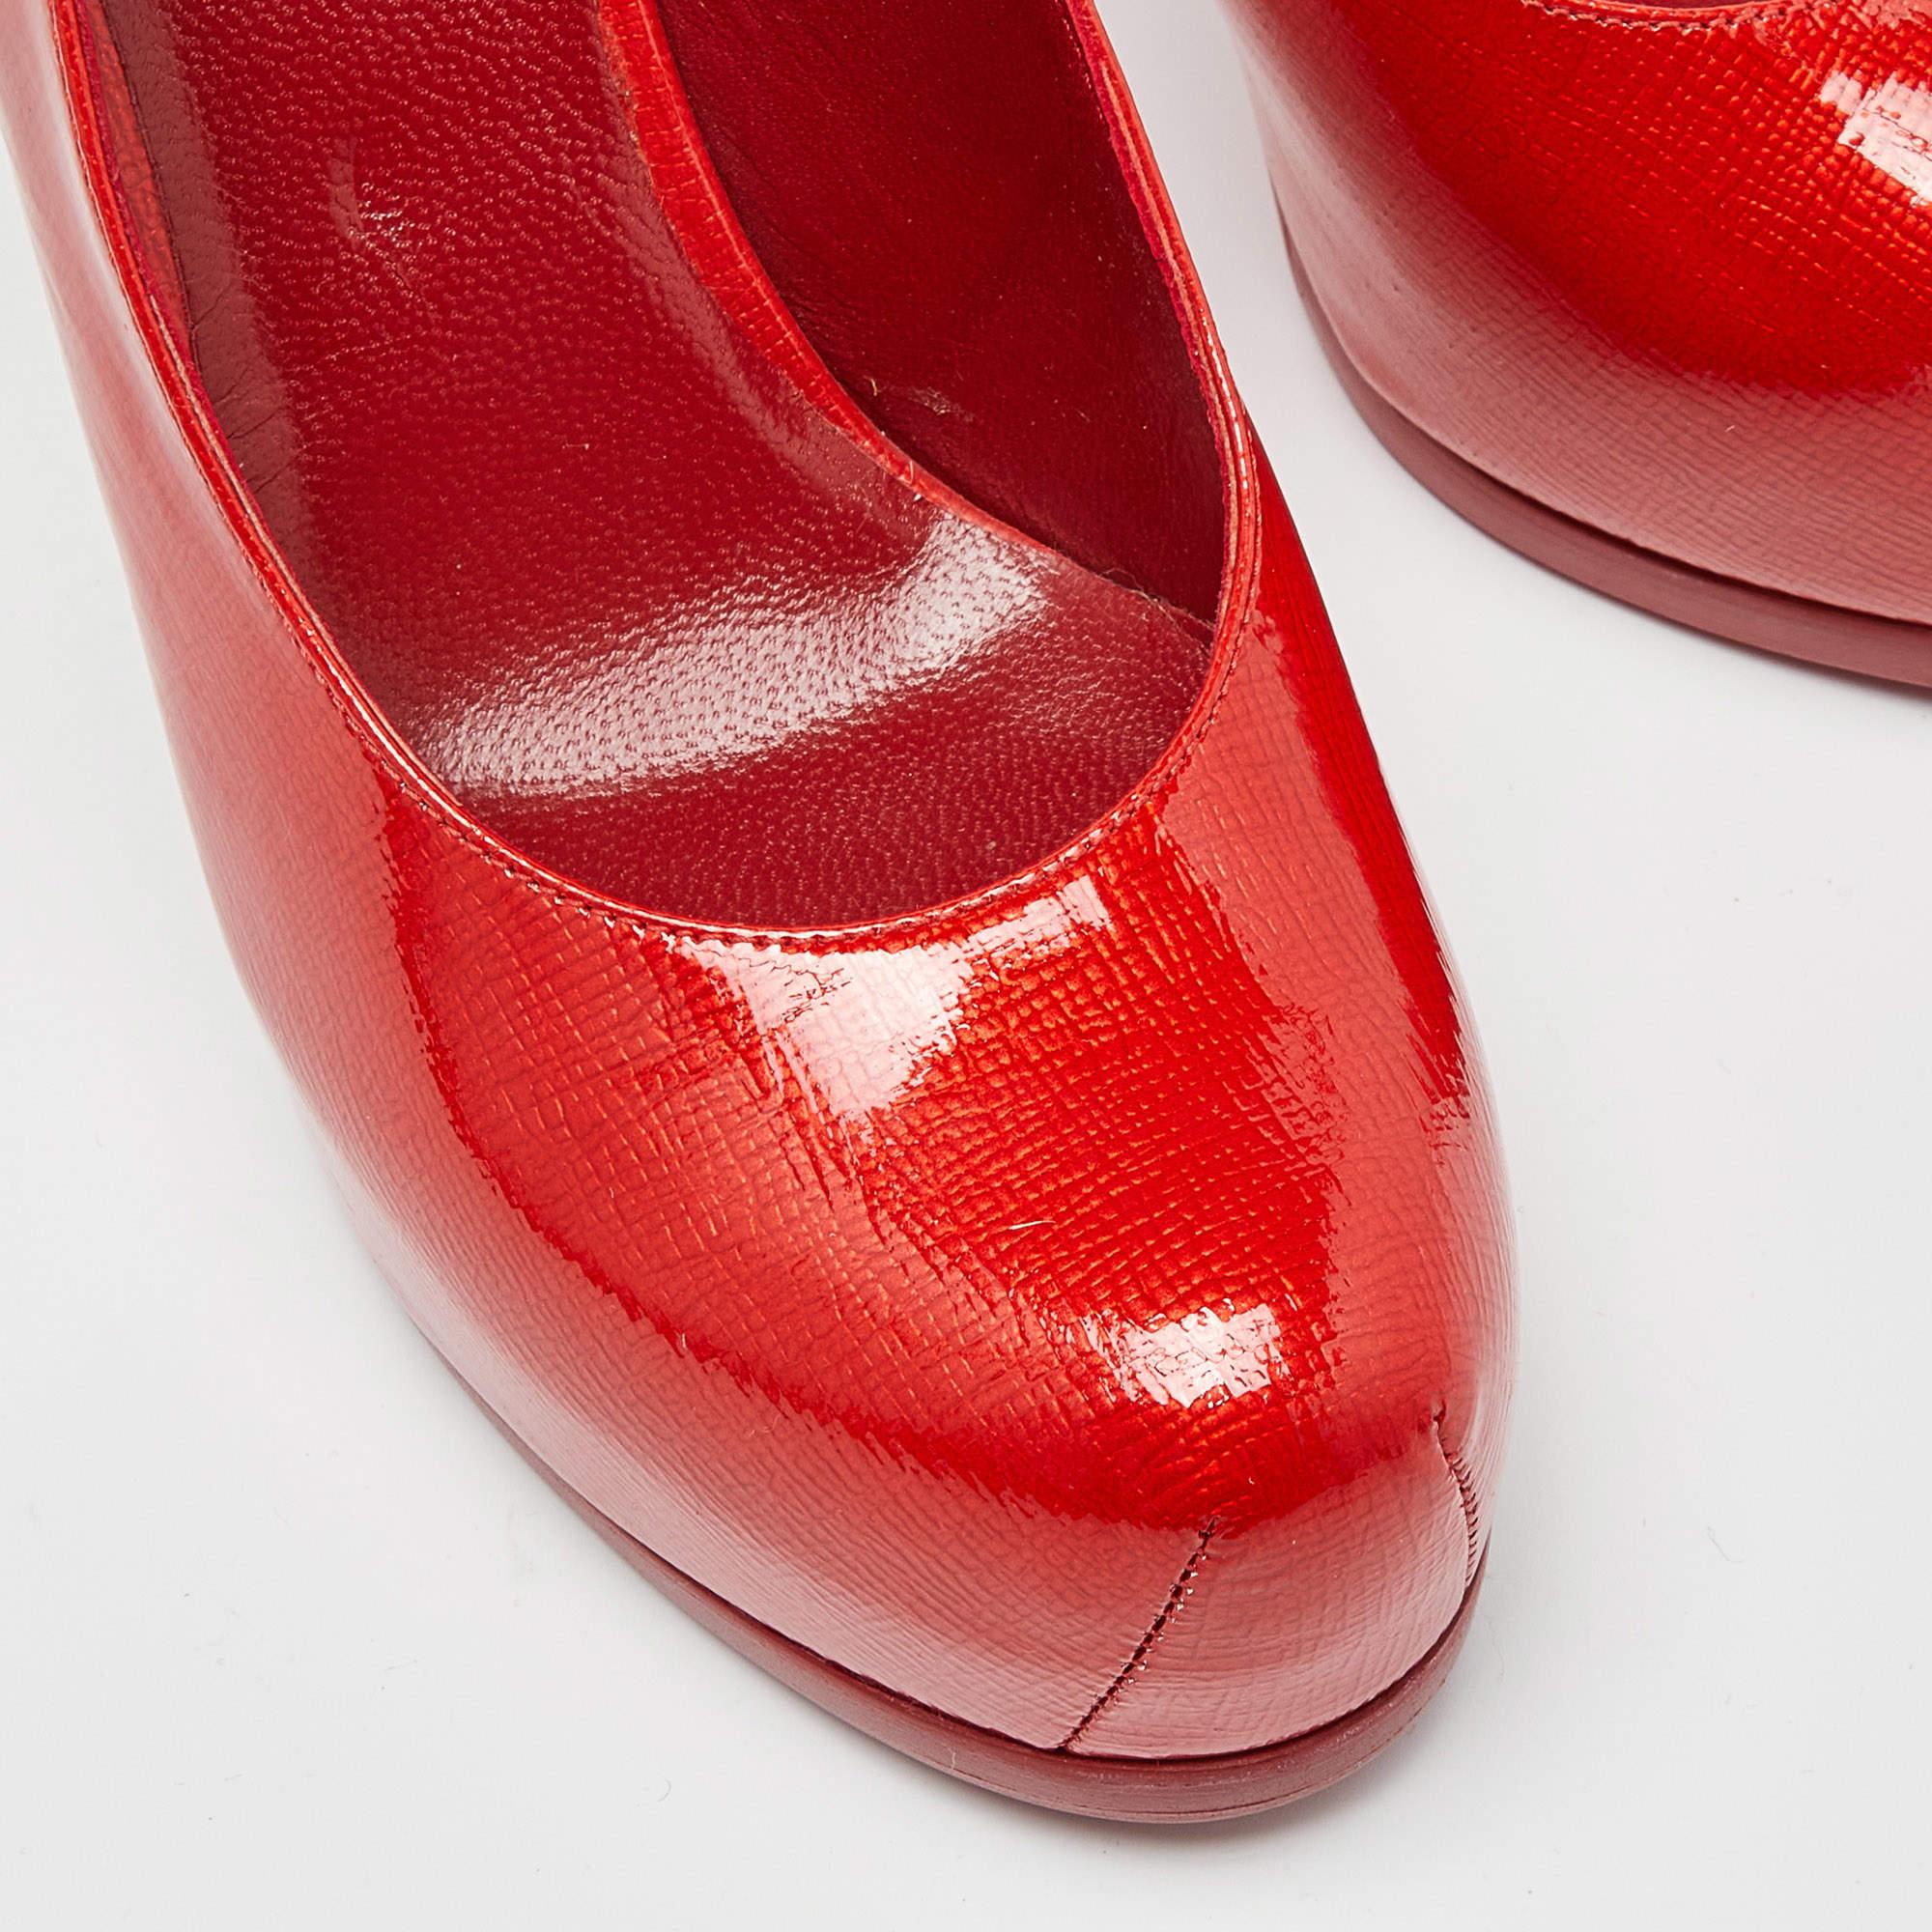 Women's Yves Saint Laurent Red Patent Leather Tribtoo Slingback Pumps Size 36.5